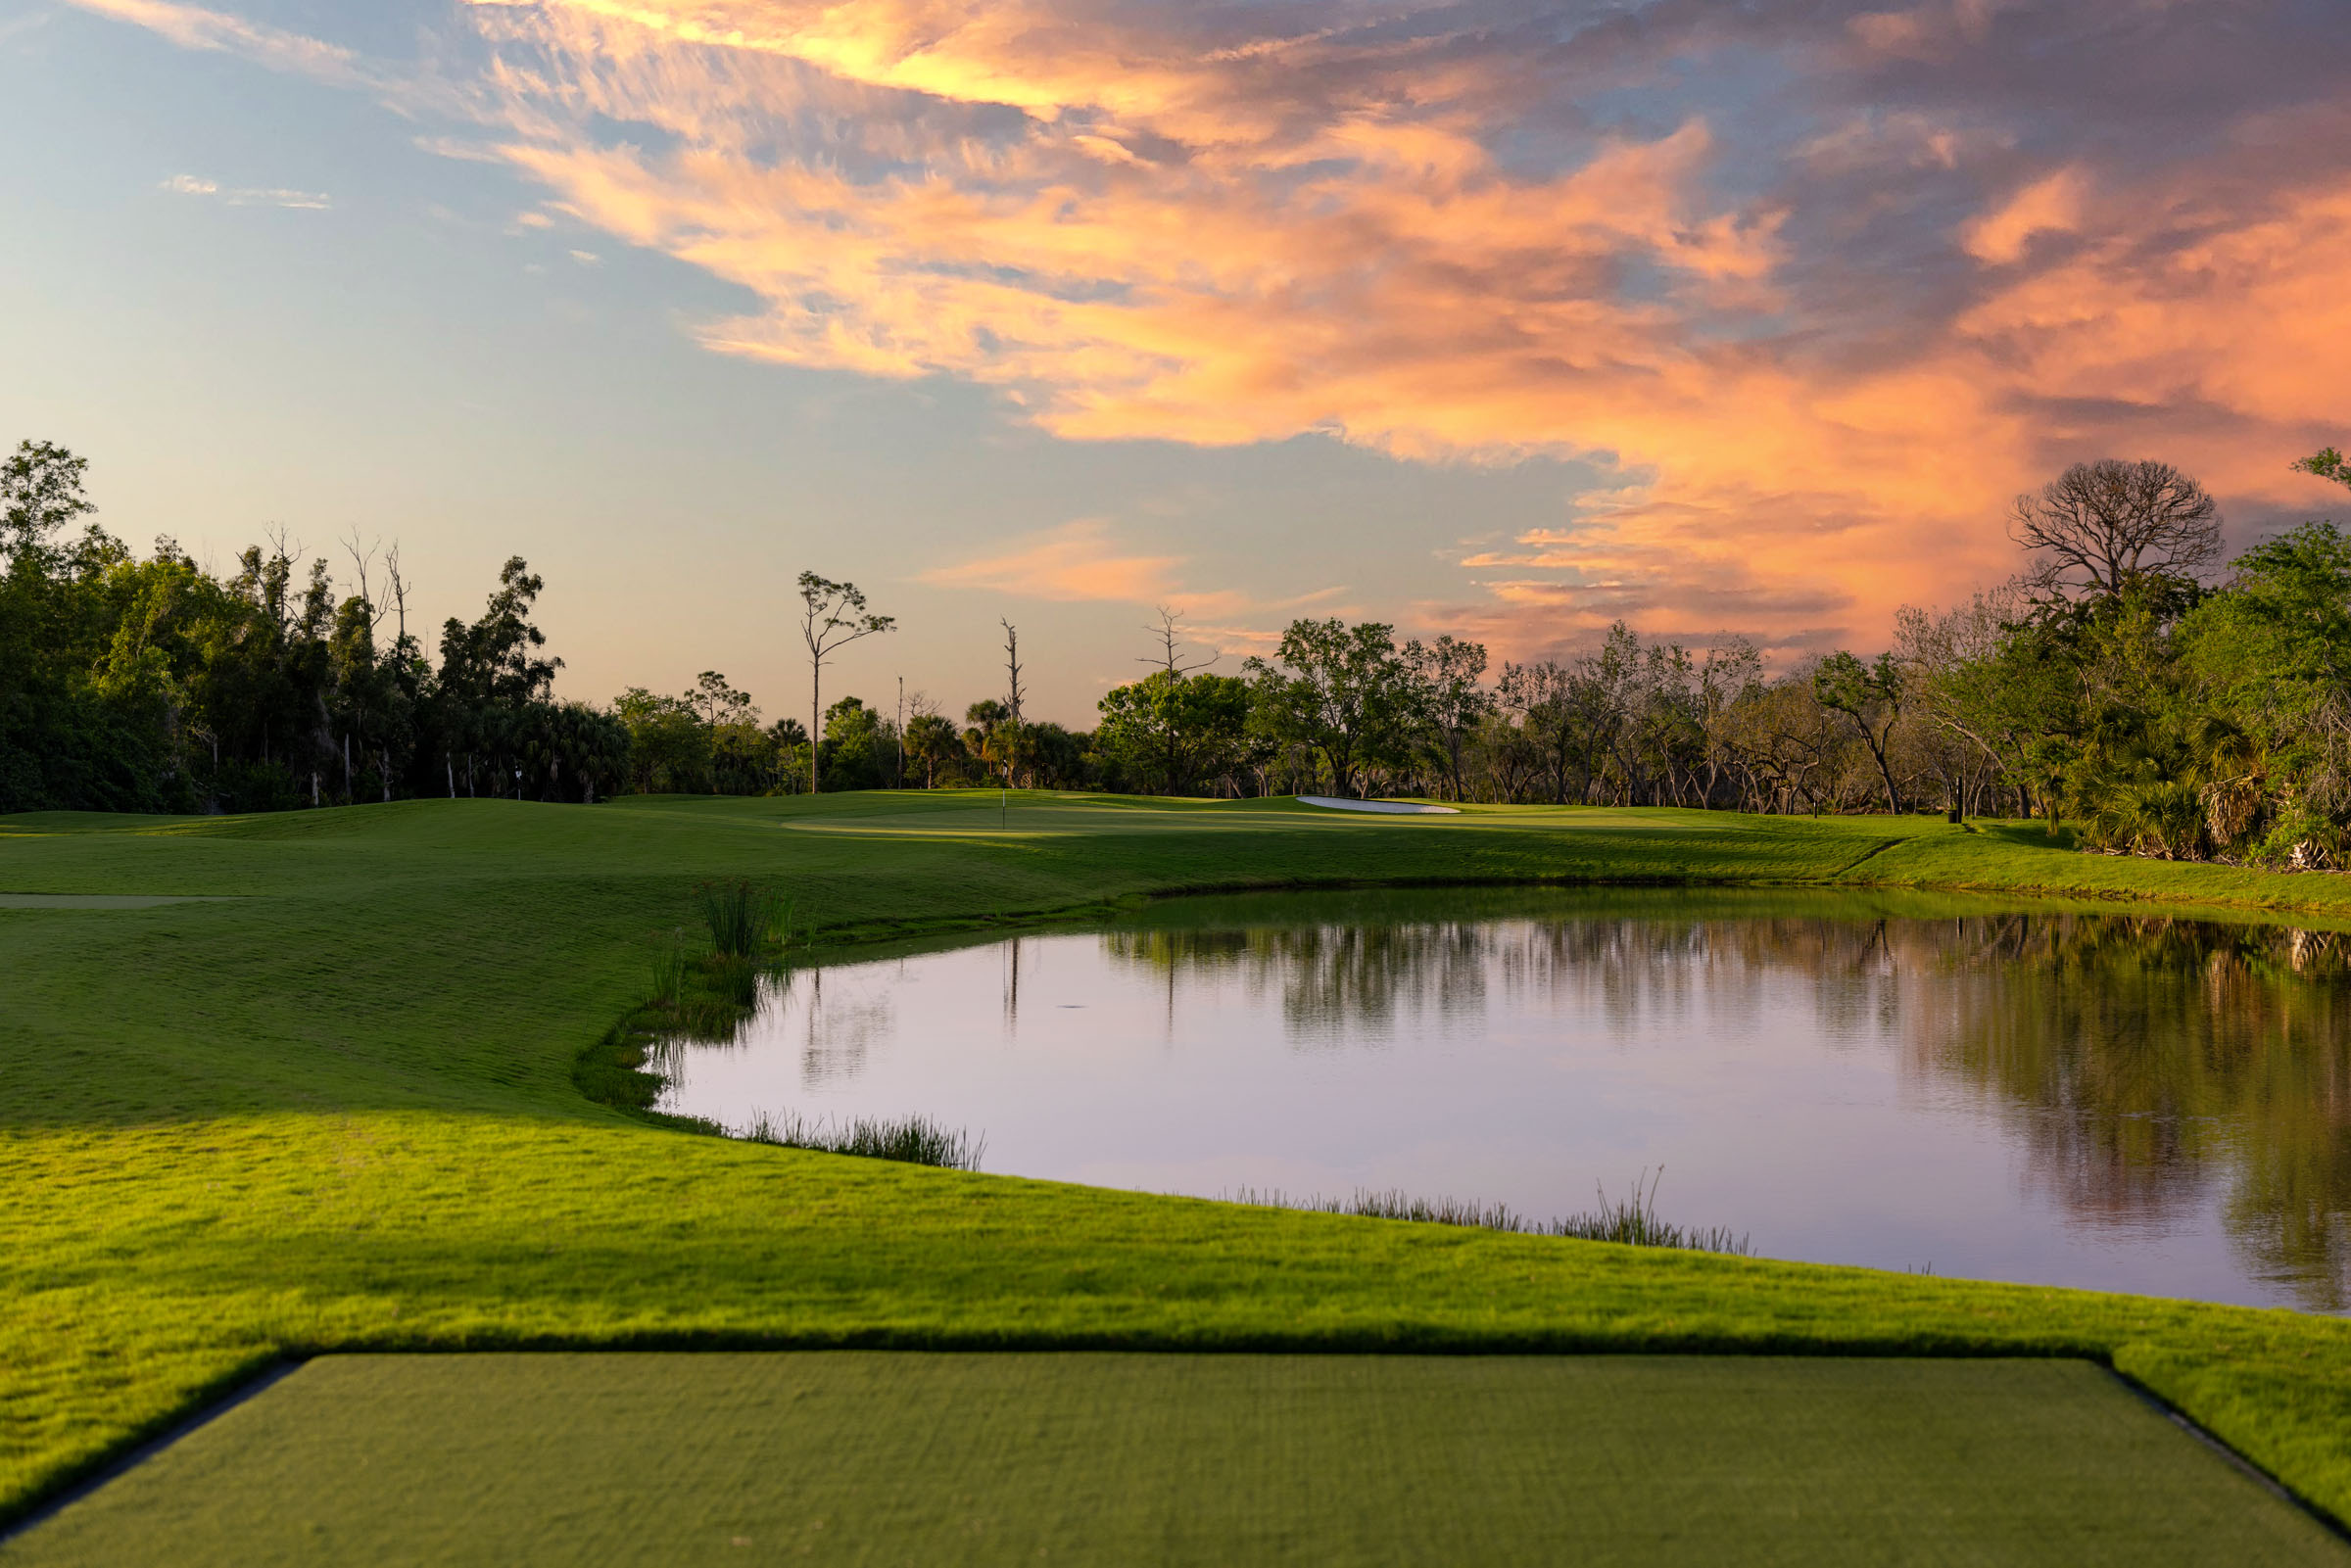 A lush green golf course with a water feature is seen at sunset, under a sky filled with vibrant, orange-hued clouds. Trees line the course in the background.